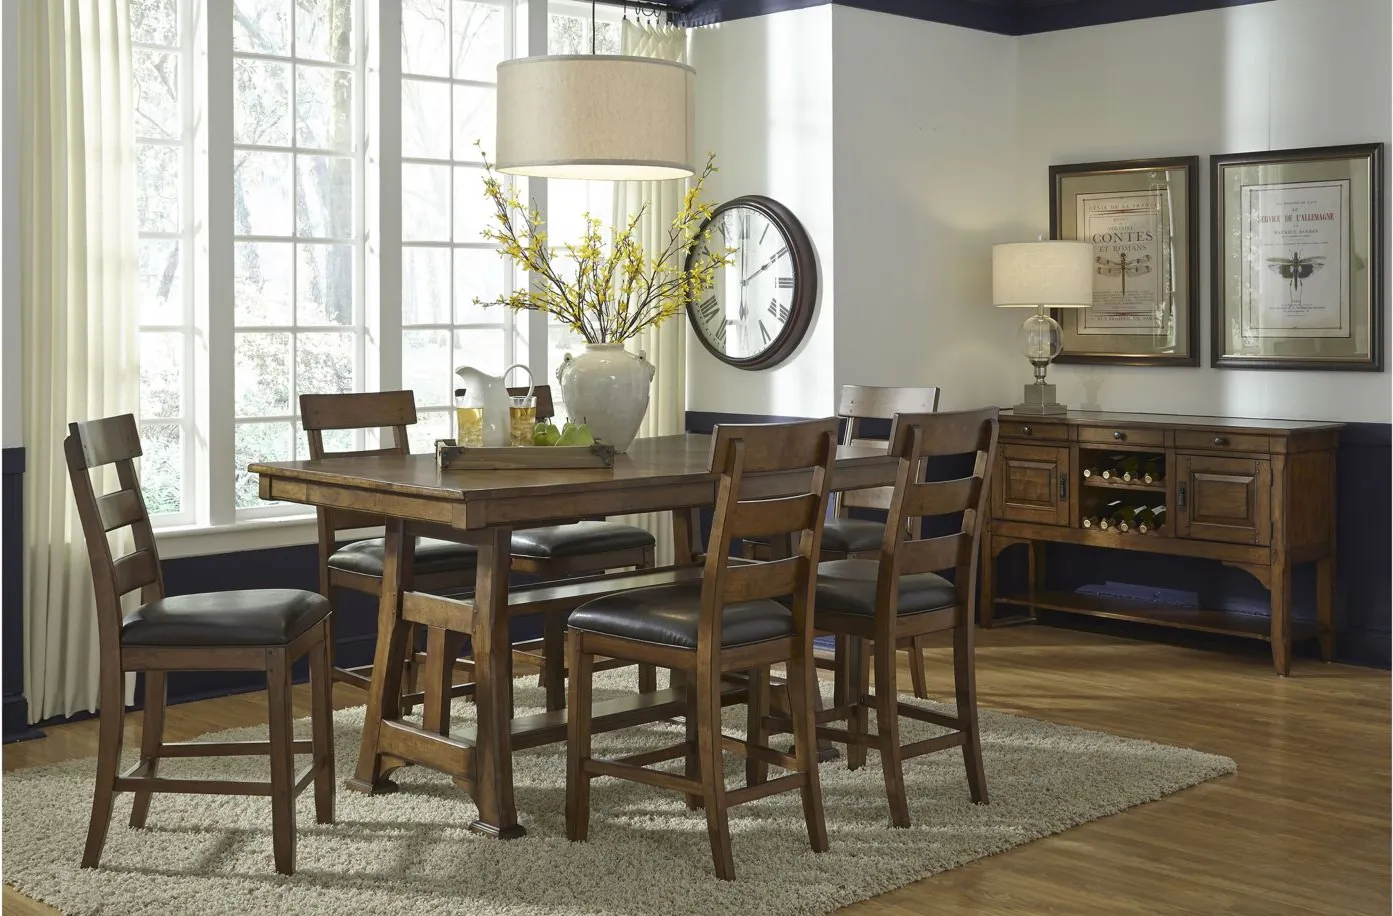 Ozark 7-pc. Counter-Height Dining Set in Warm Pecan by A-America